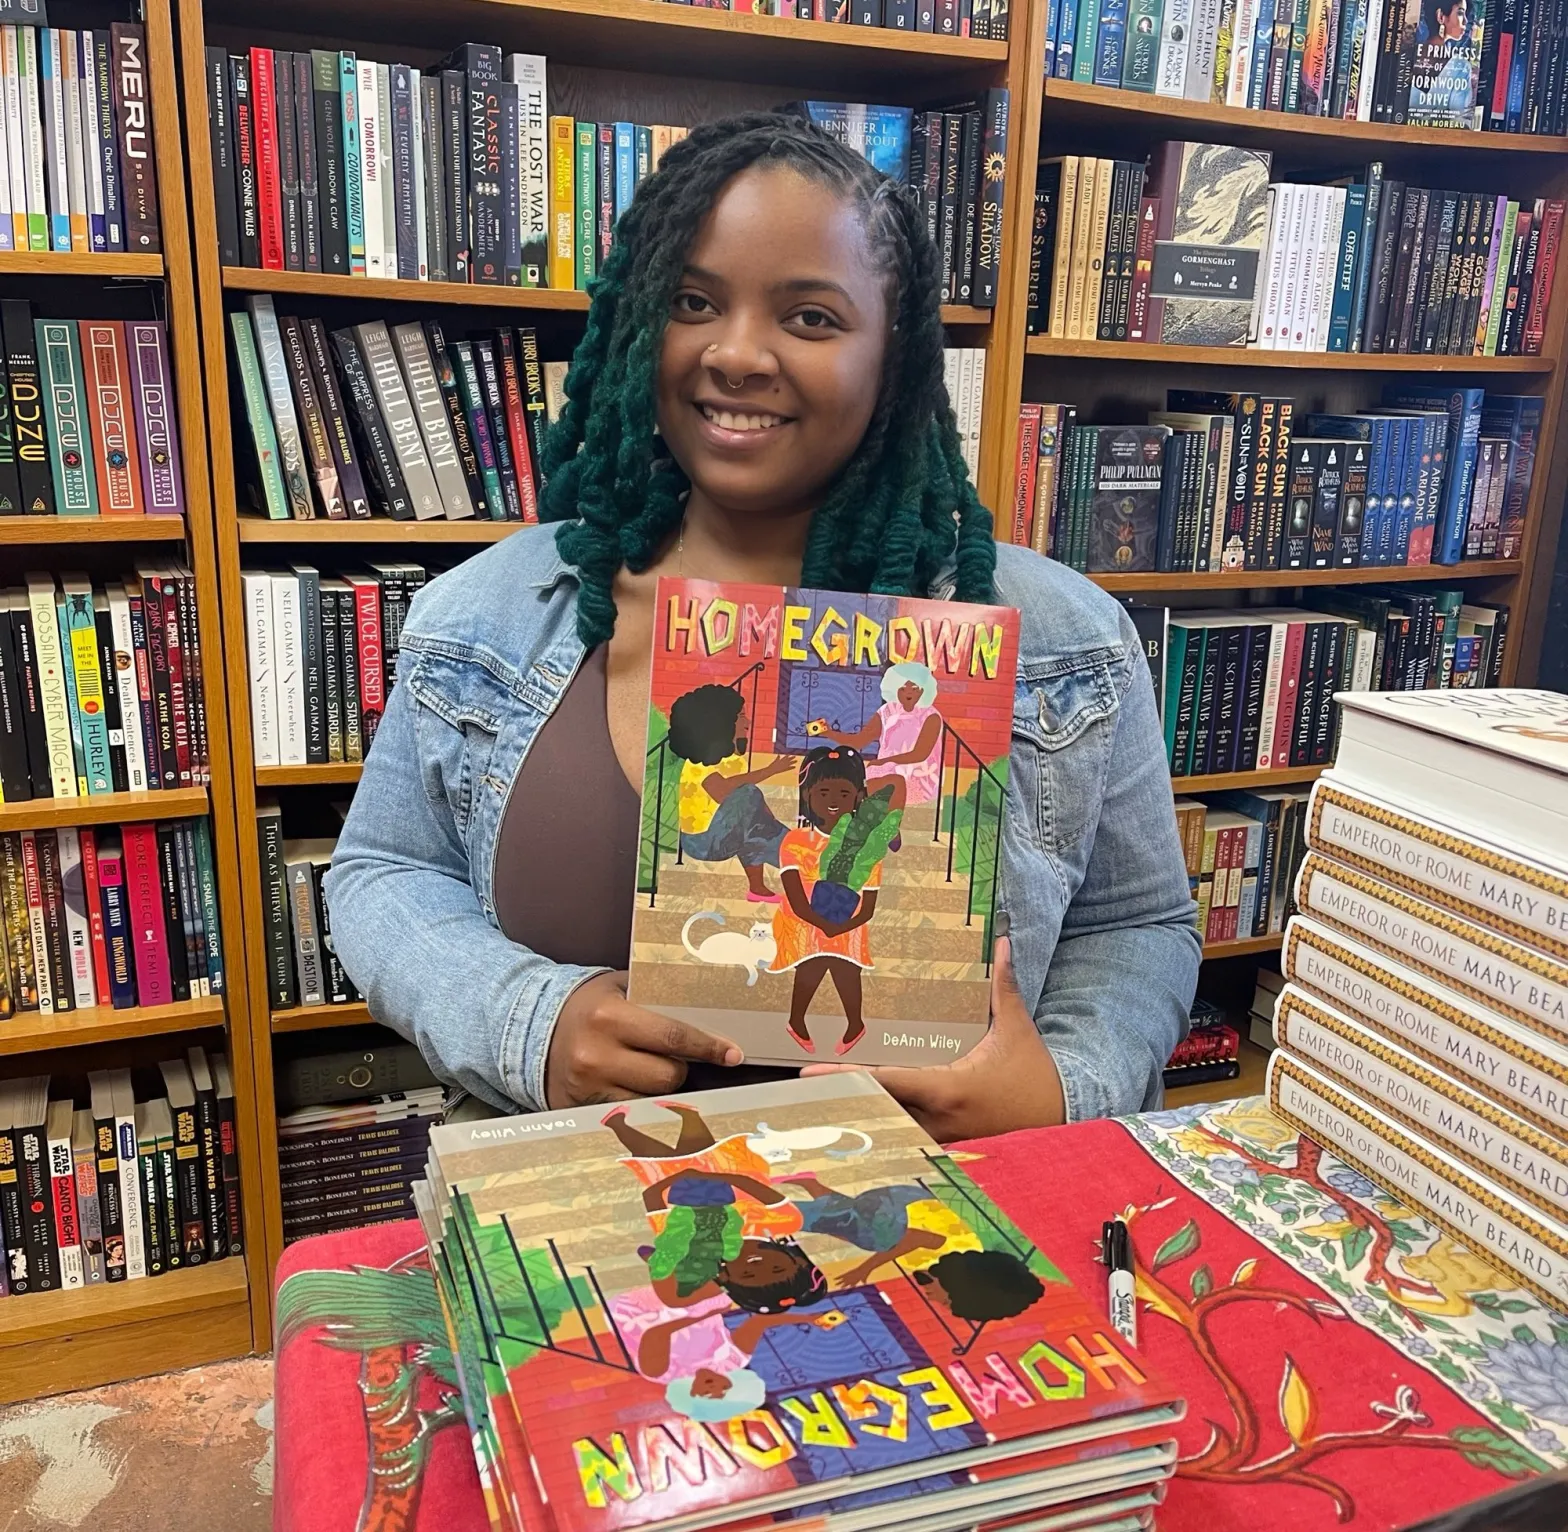 A person with teal braids and a light denim jacket holding up a book standing in front of a shelf of more books.